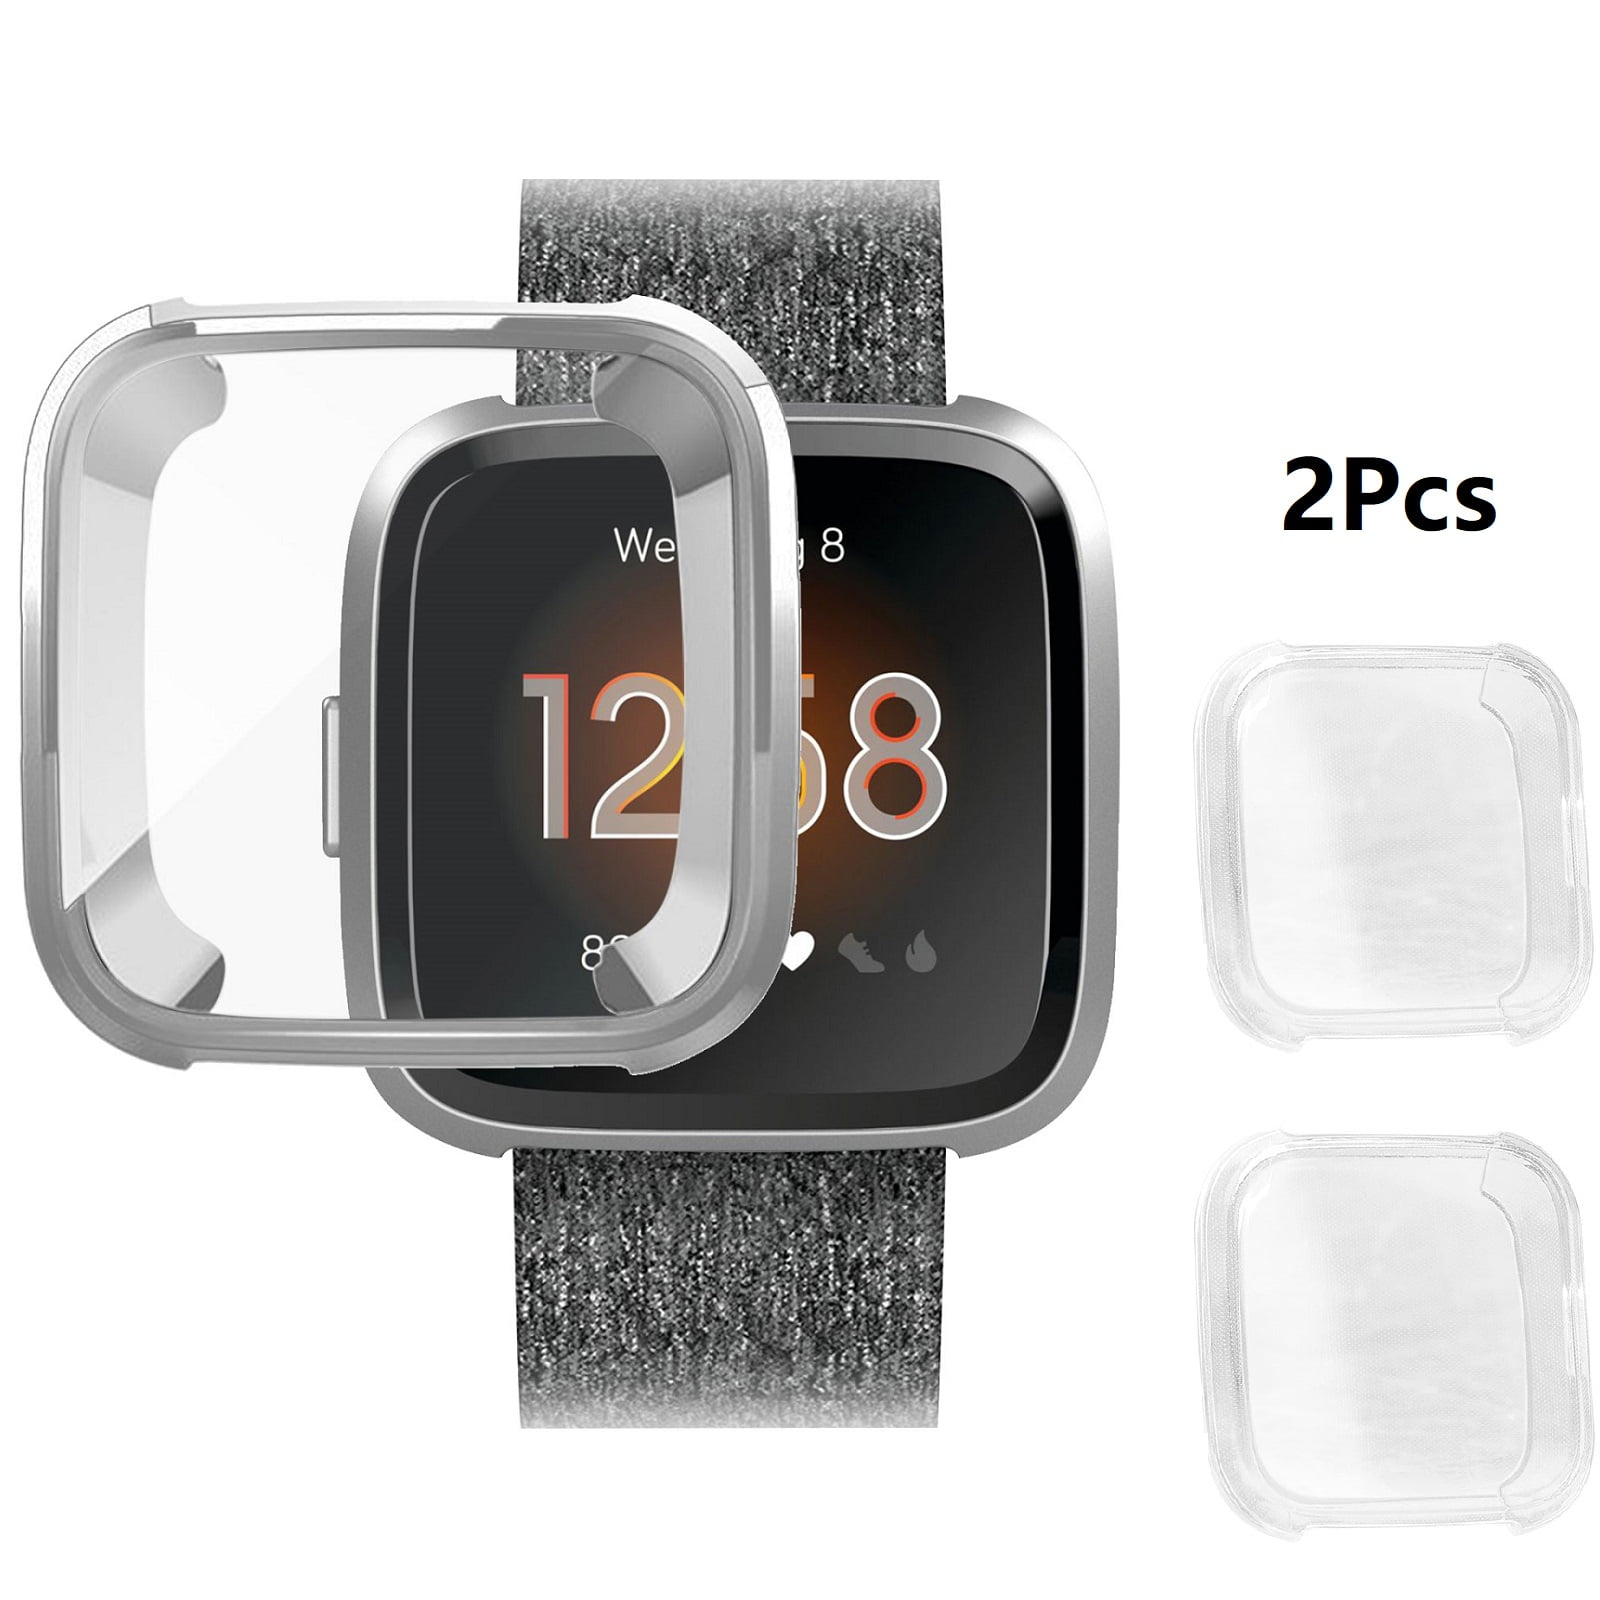 Silicone TPU Shell Case Screen Protector Frame Cover for Fitbit Versa US Stock 